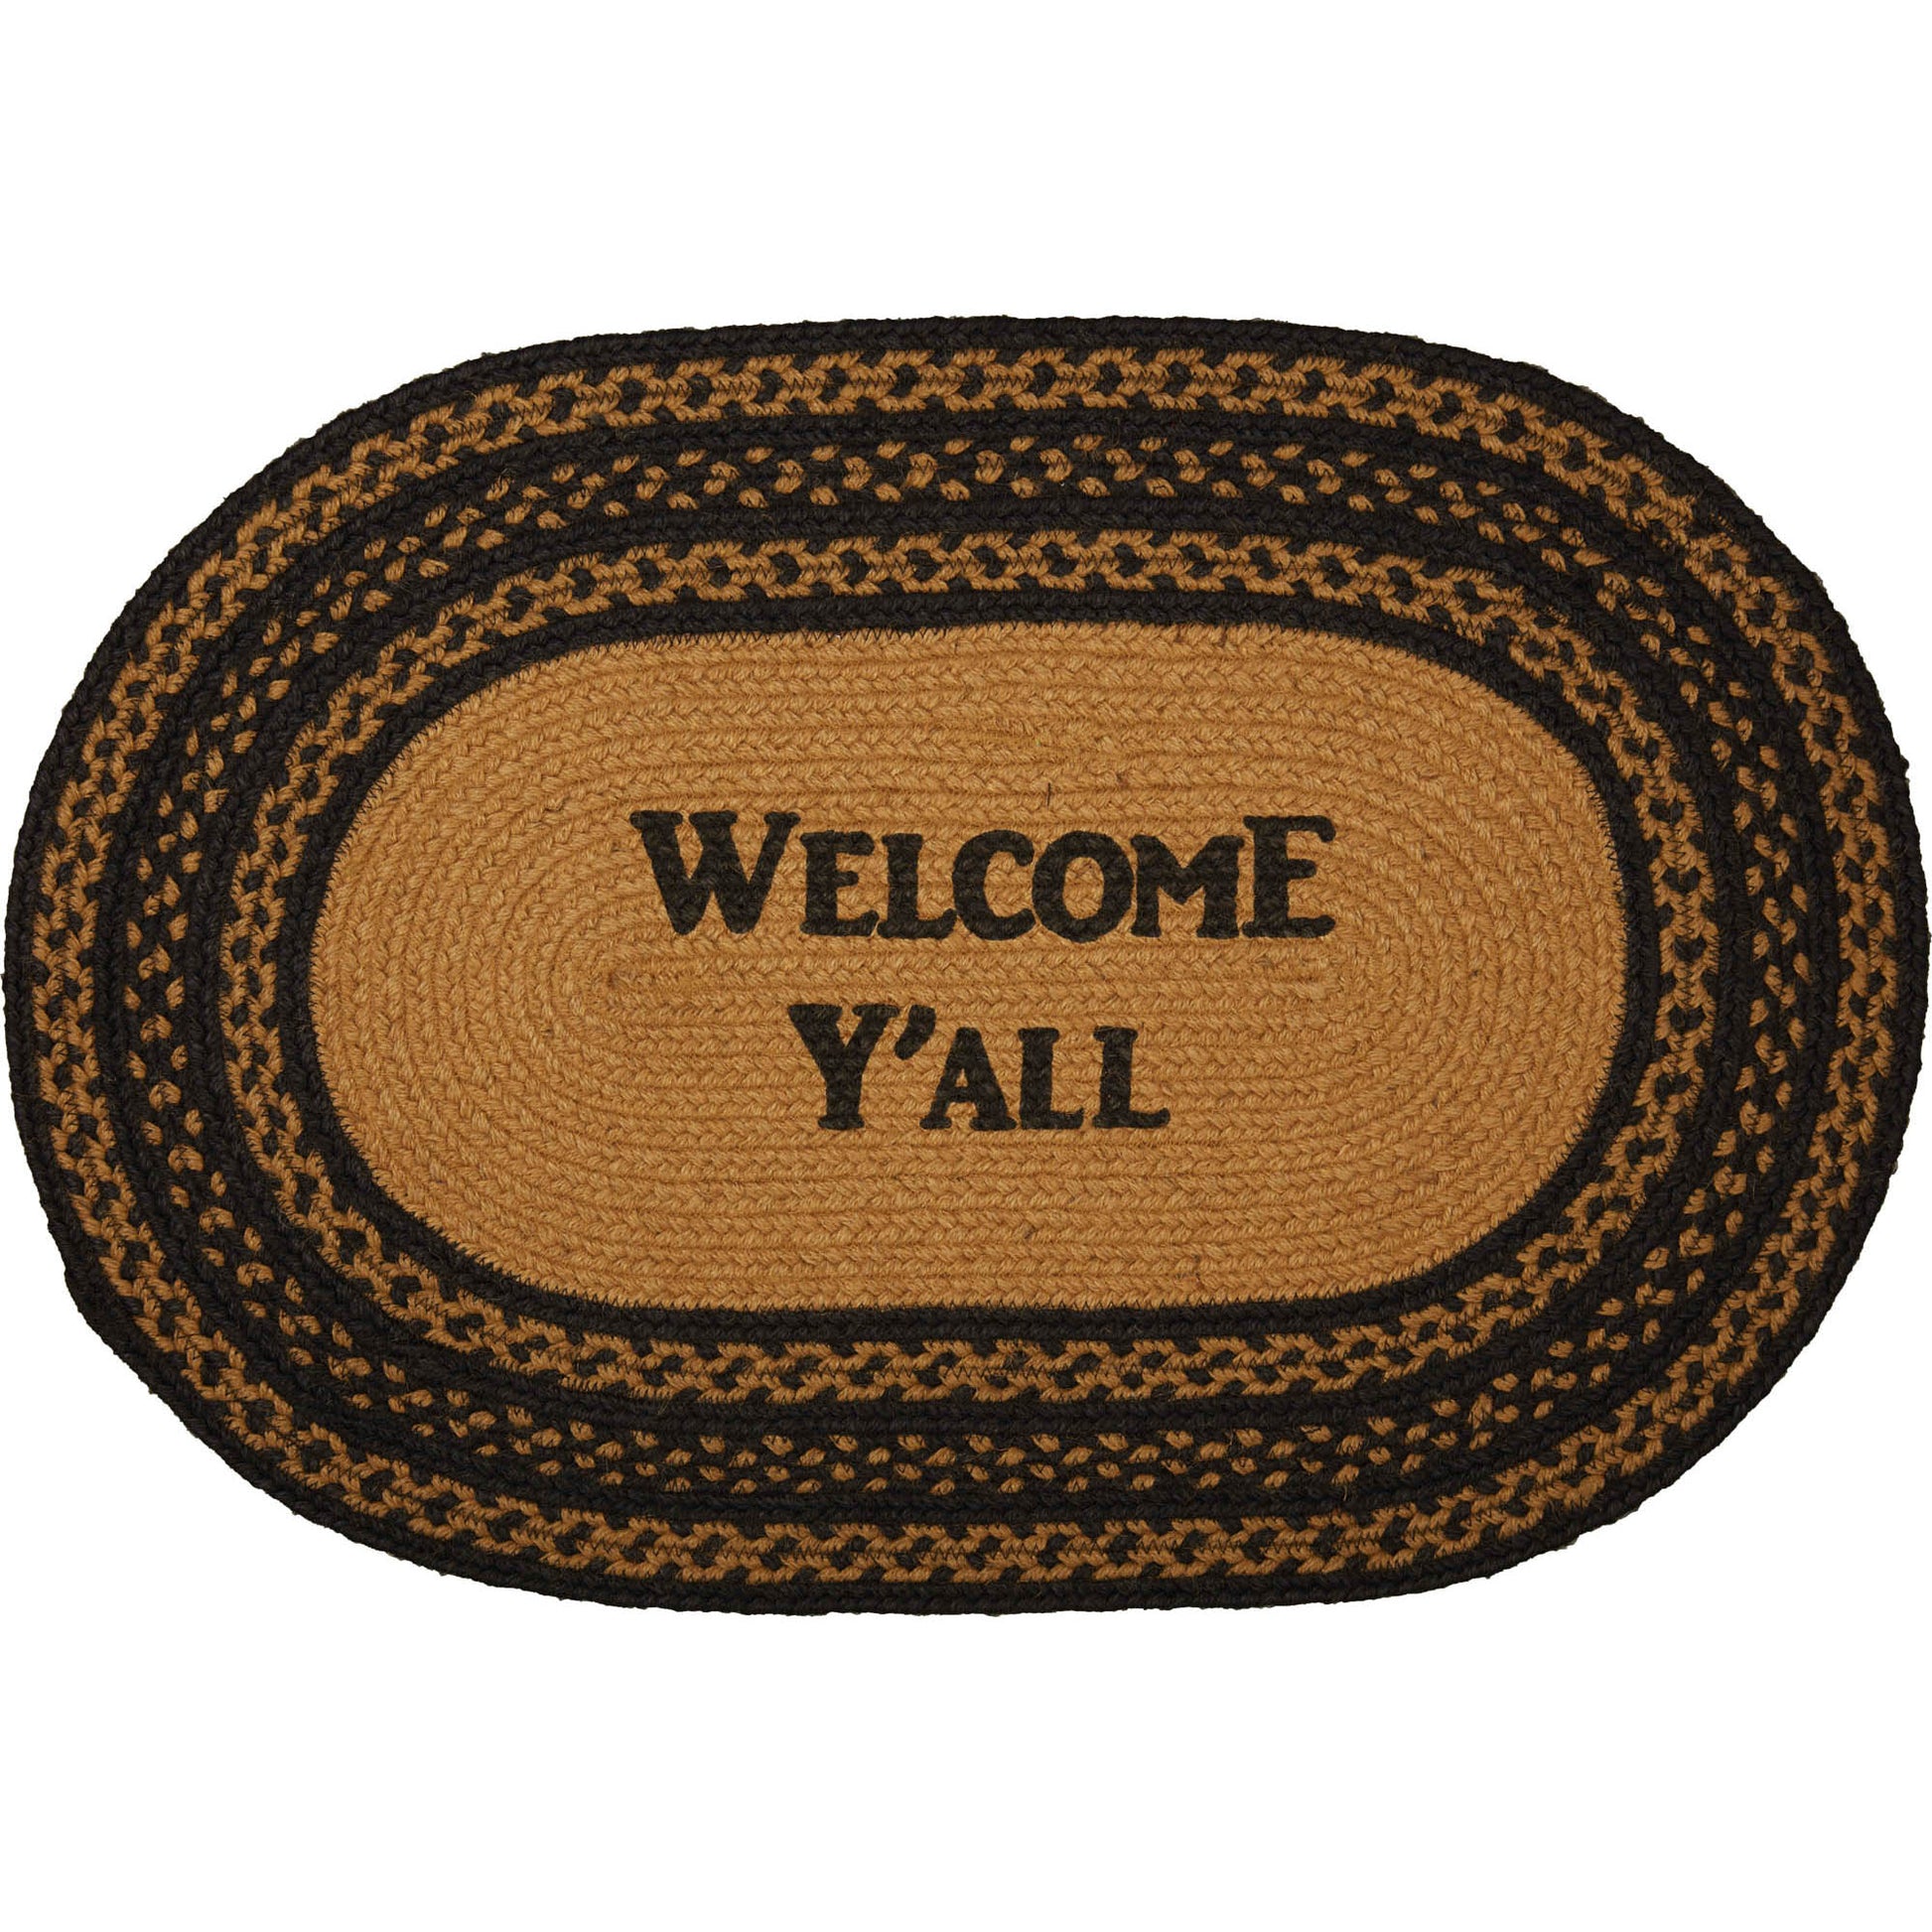 69787-Farmhouse-Jute-Rug-Oval-Stencil-Welcome-Y-all-w-Pad-20x30-image-1